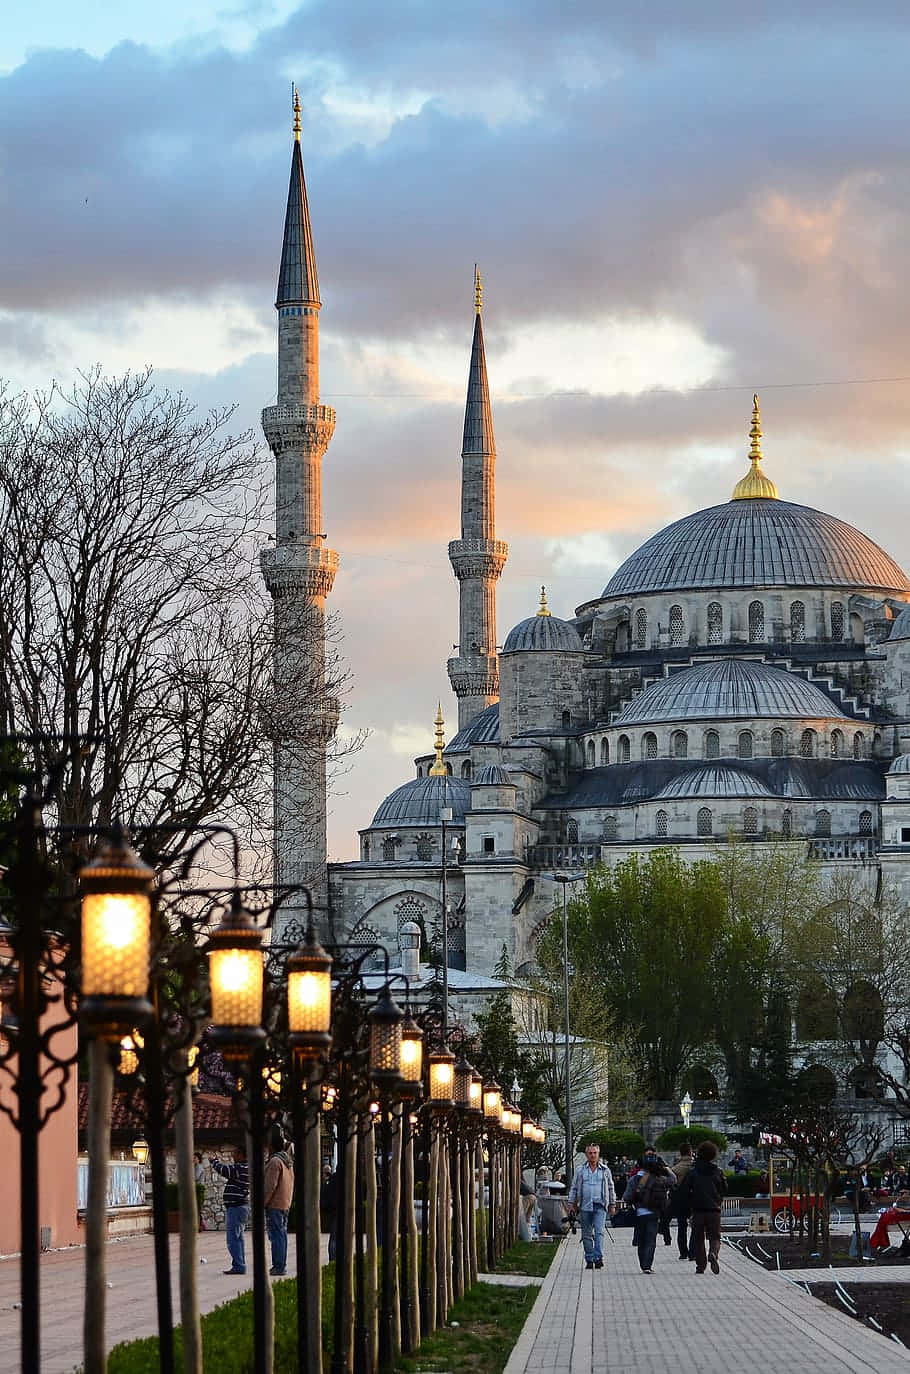 Tranquil moment on the street near the awe-inspiring Blue Mosque Wallpaper